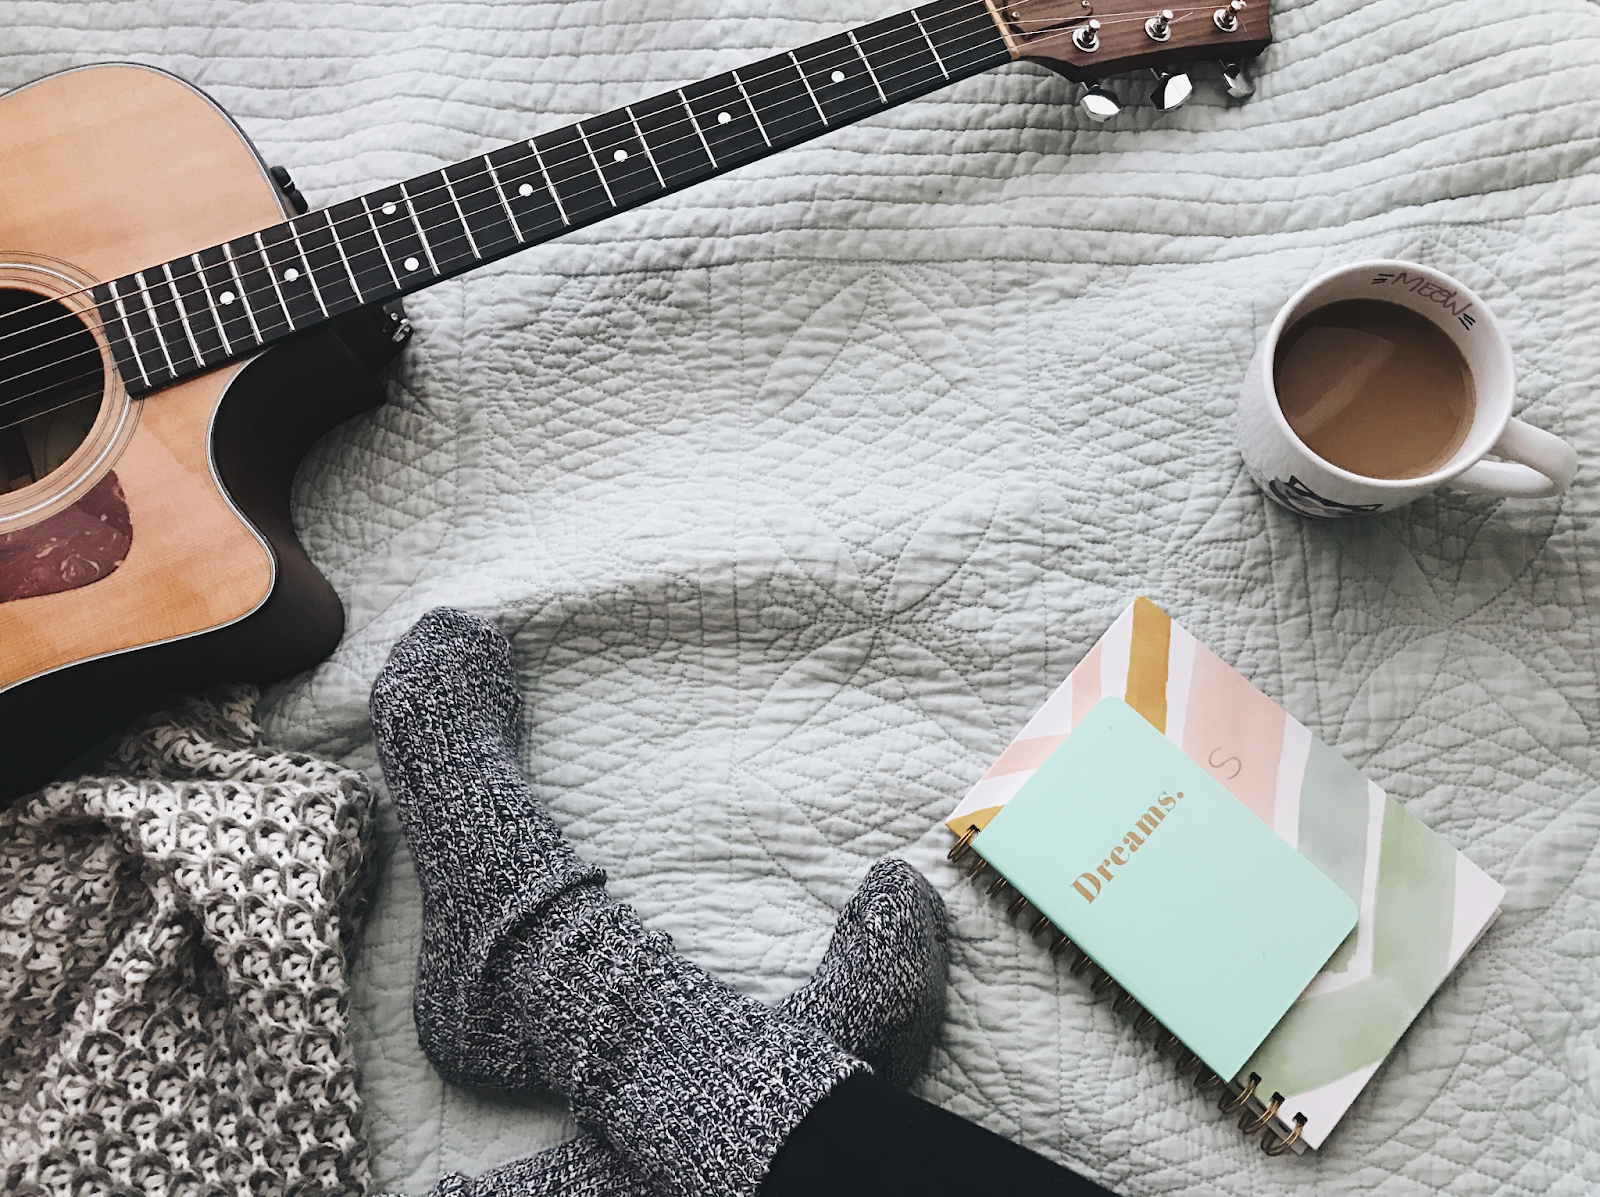 guitar and coffee